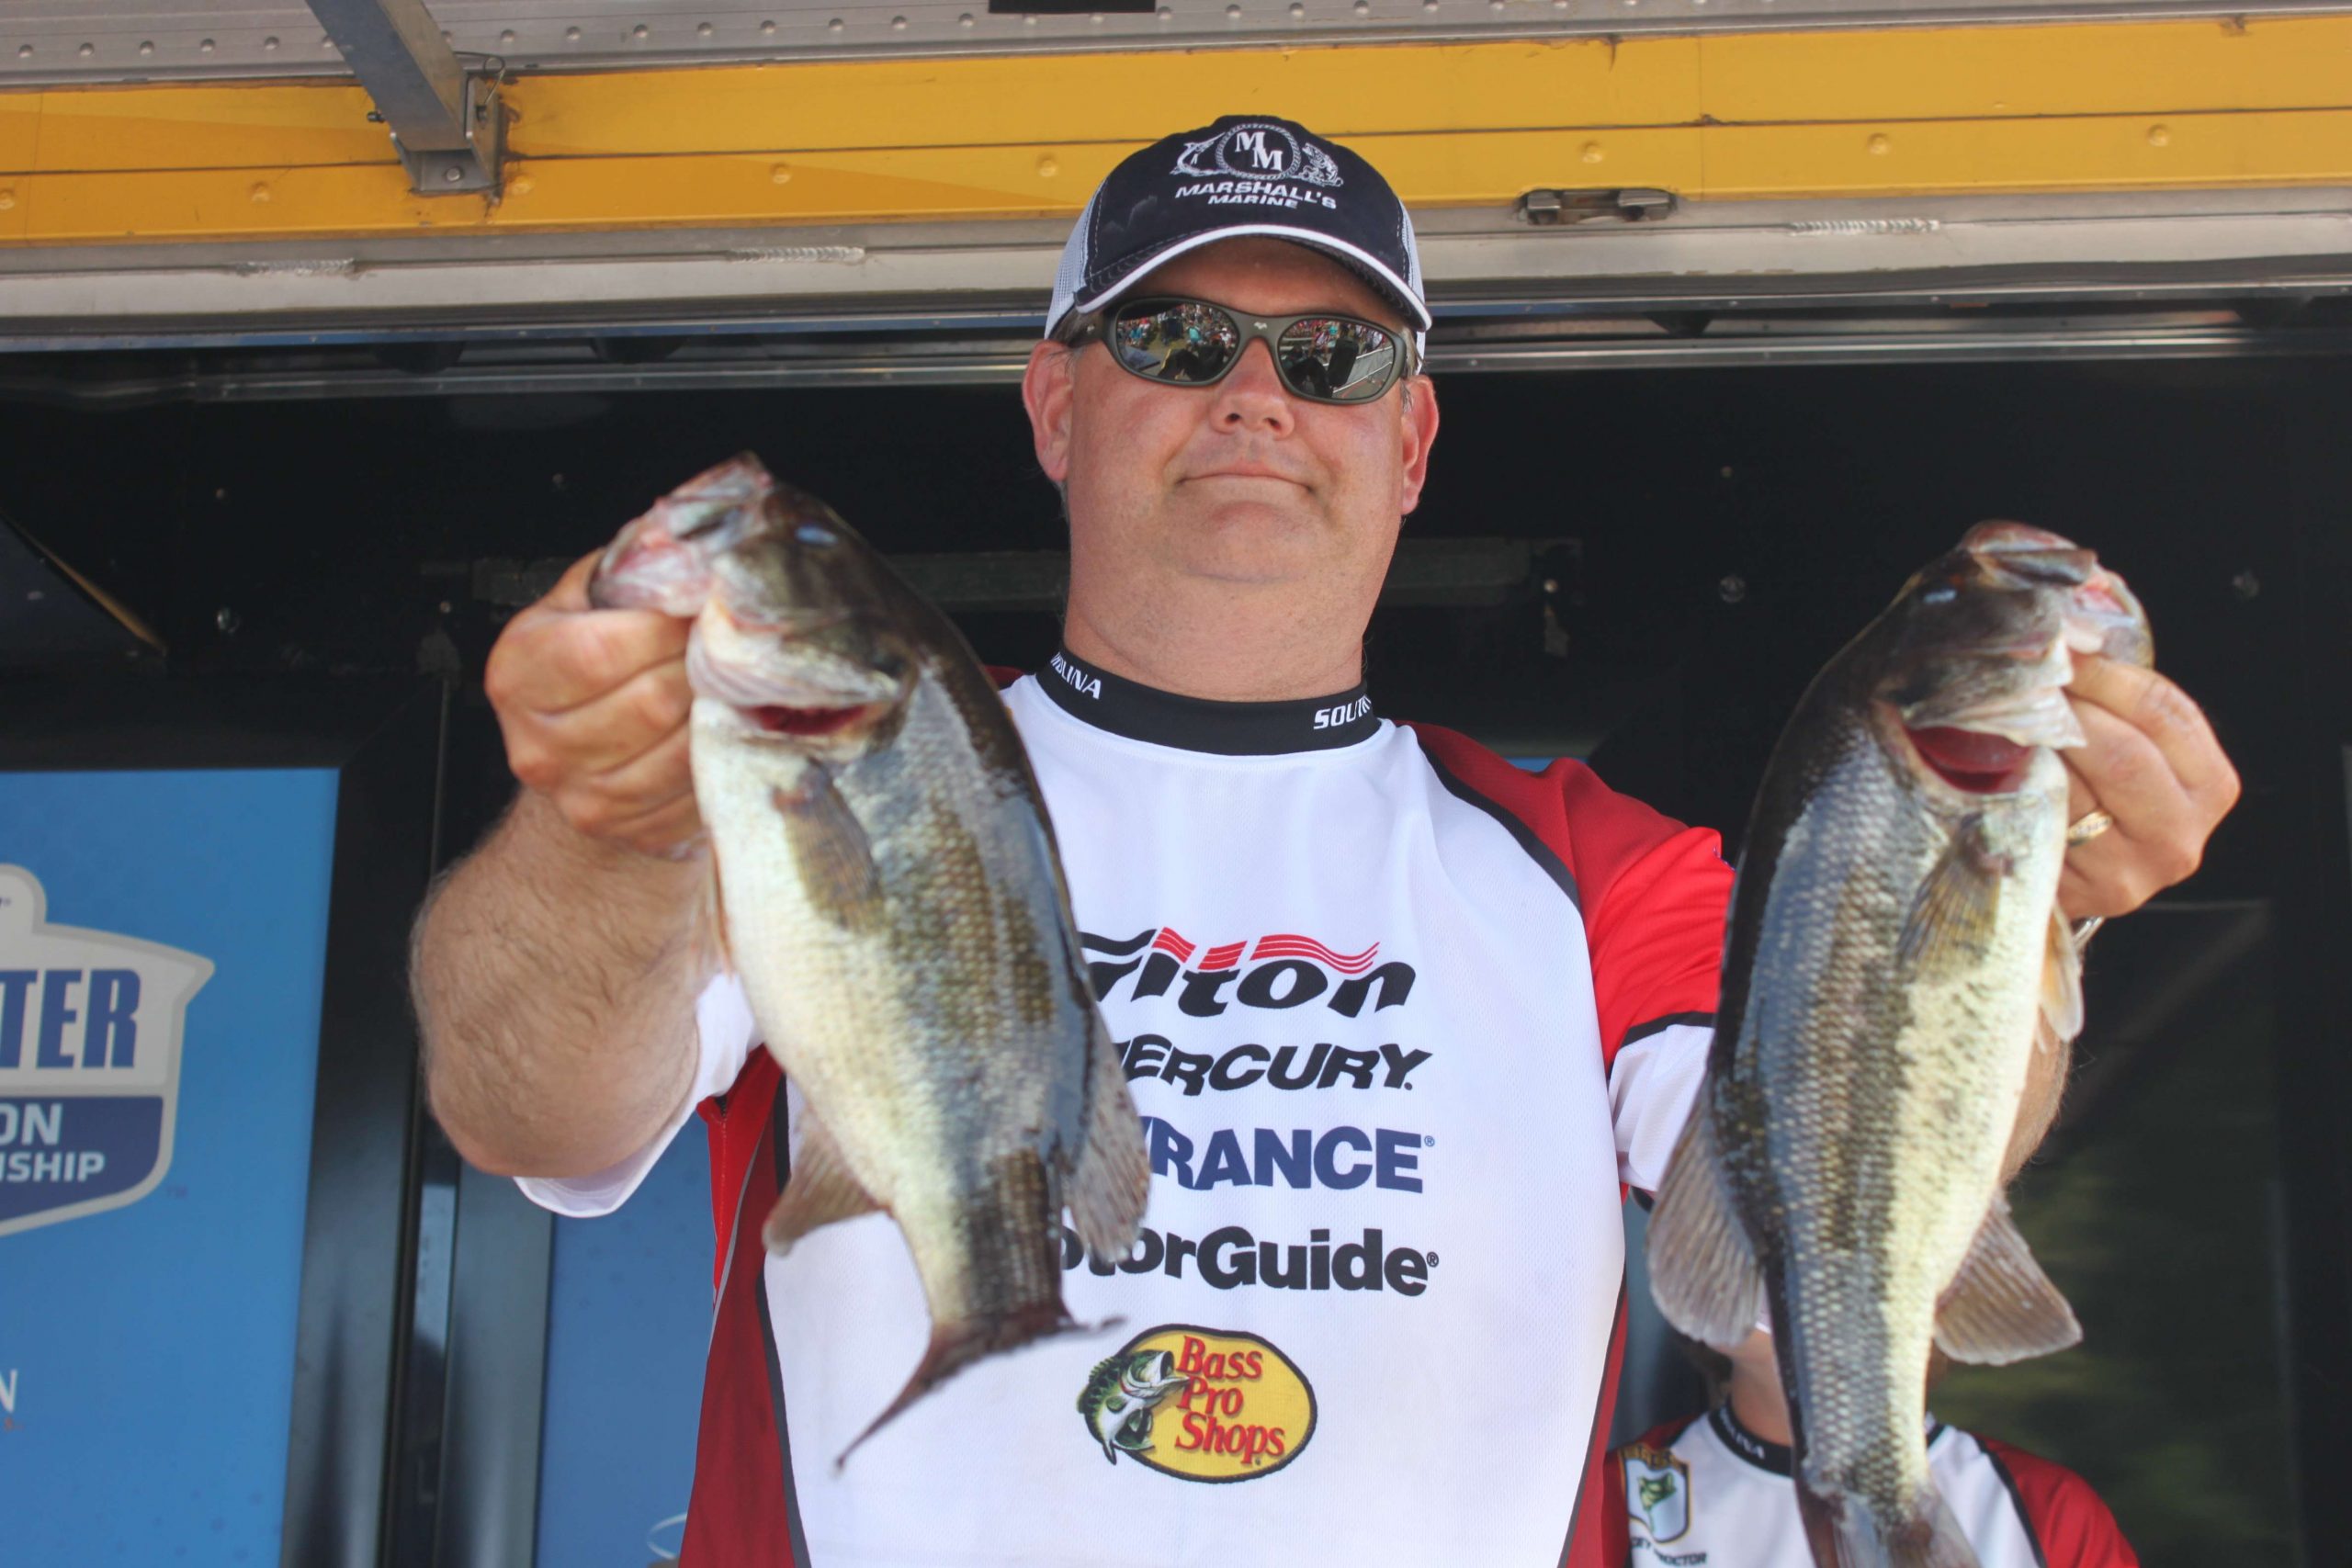 Chris Jones of South Carolina placed eighth among boaters with a 23-12 total.